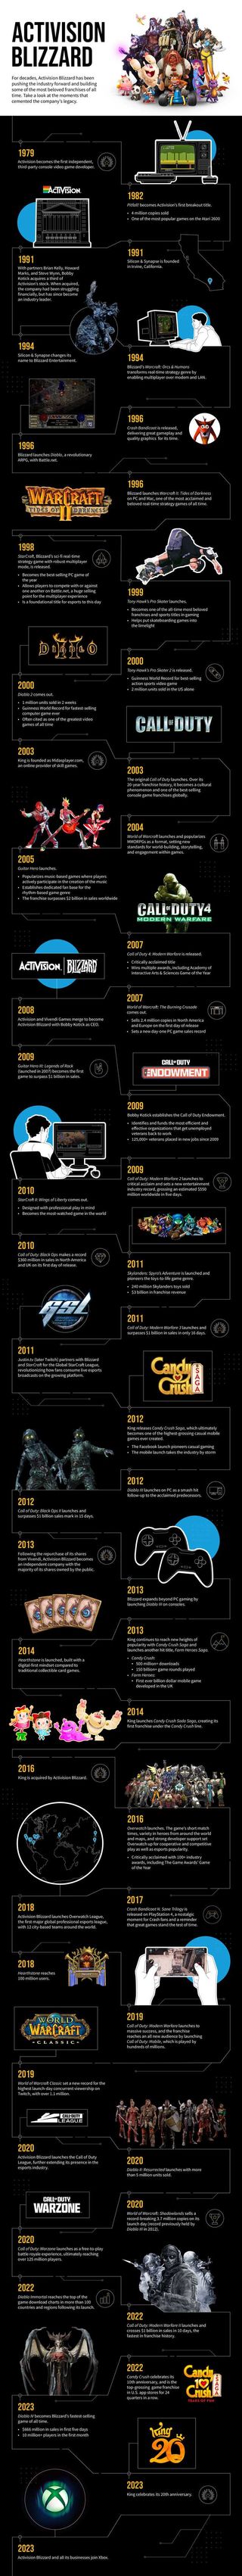 Infographic detailing Activision Blizzards 44-year history